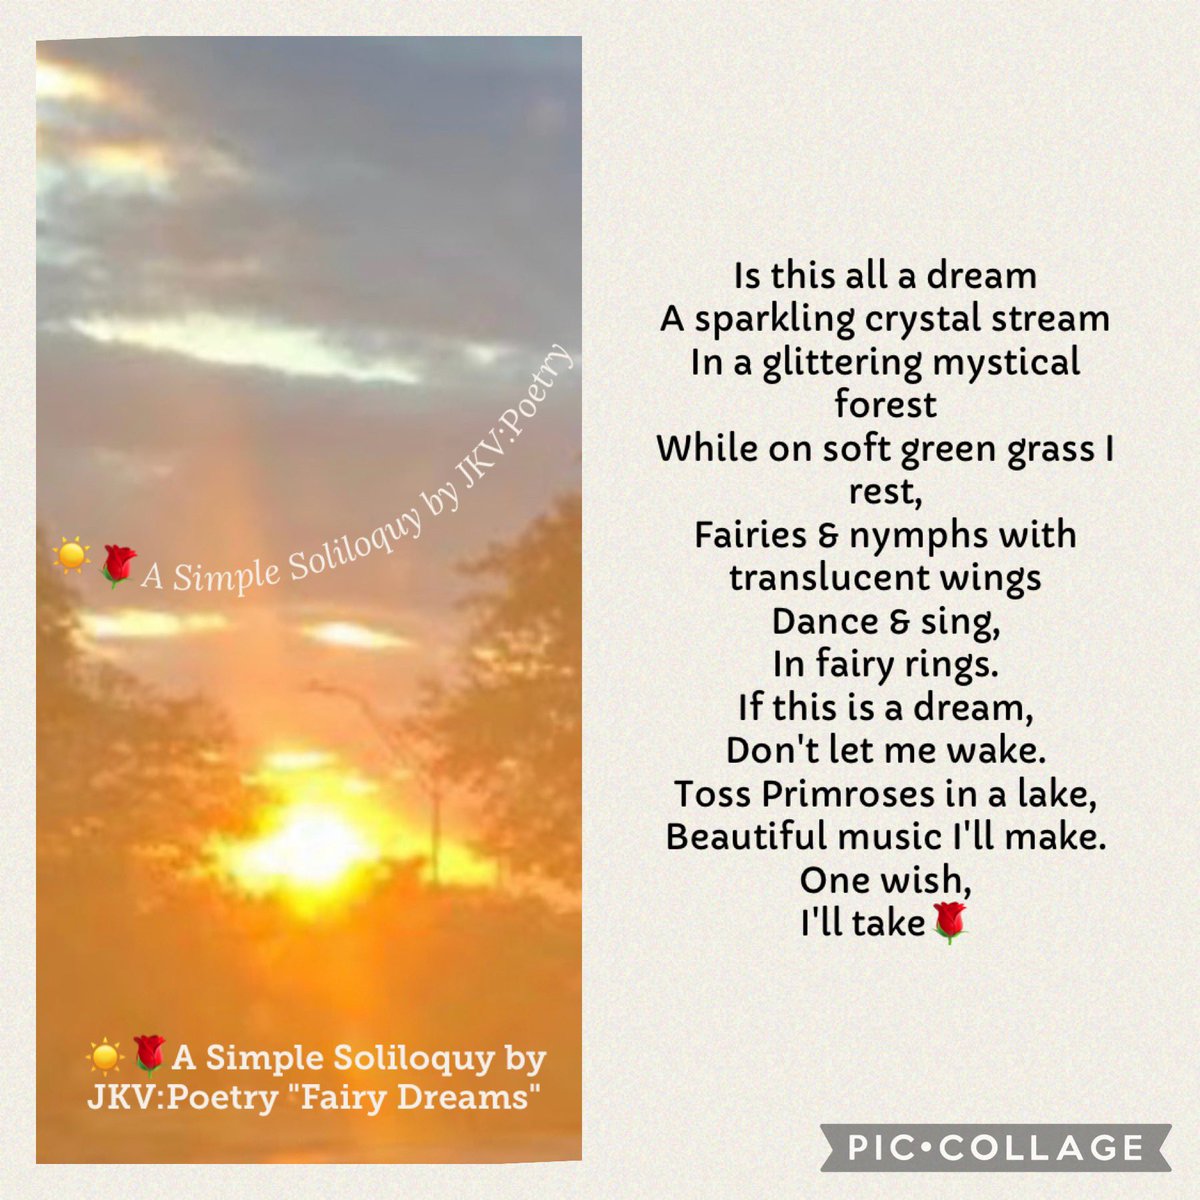 ☀️🌹A Simple Soliloquy by JKV:Poetry 'Fairy Dreams' #soliloquybyjkv #writersoftwitter #amwriting #poem #WritingCommunity #writers #writing #writerslife #poetrycommunity #poetry #writerscommunity #poetsoftwitter #creativewriting #micropoetry #POEMS #poet #poetrylovers